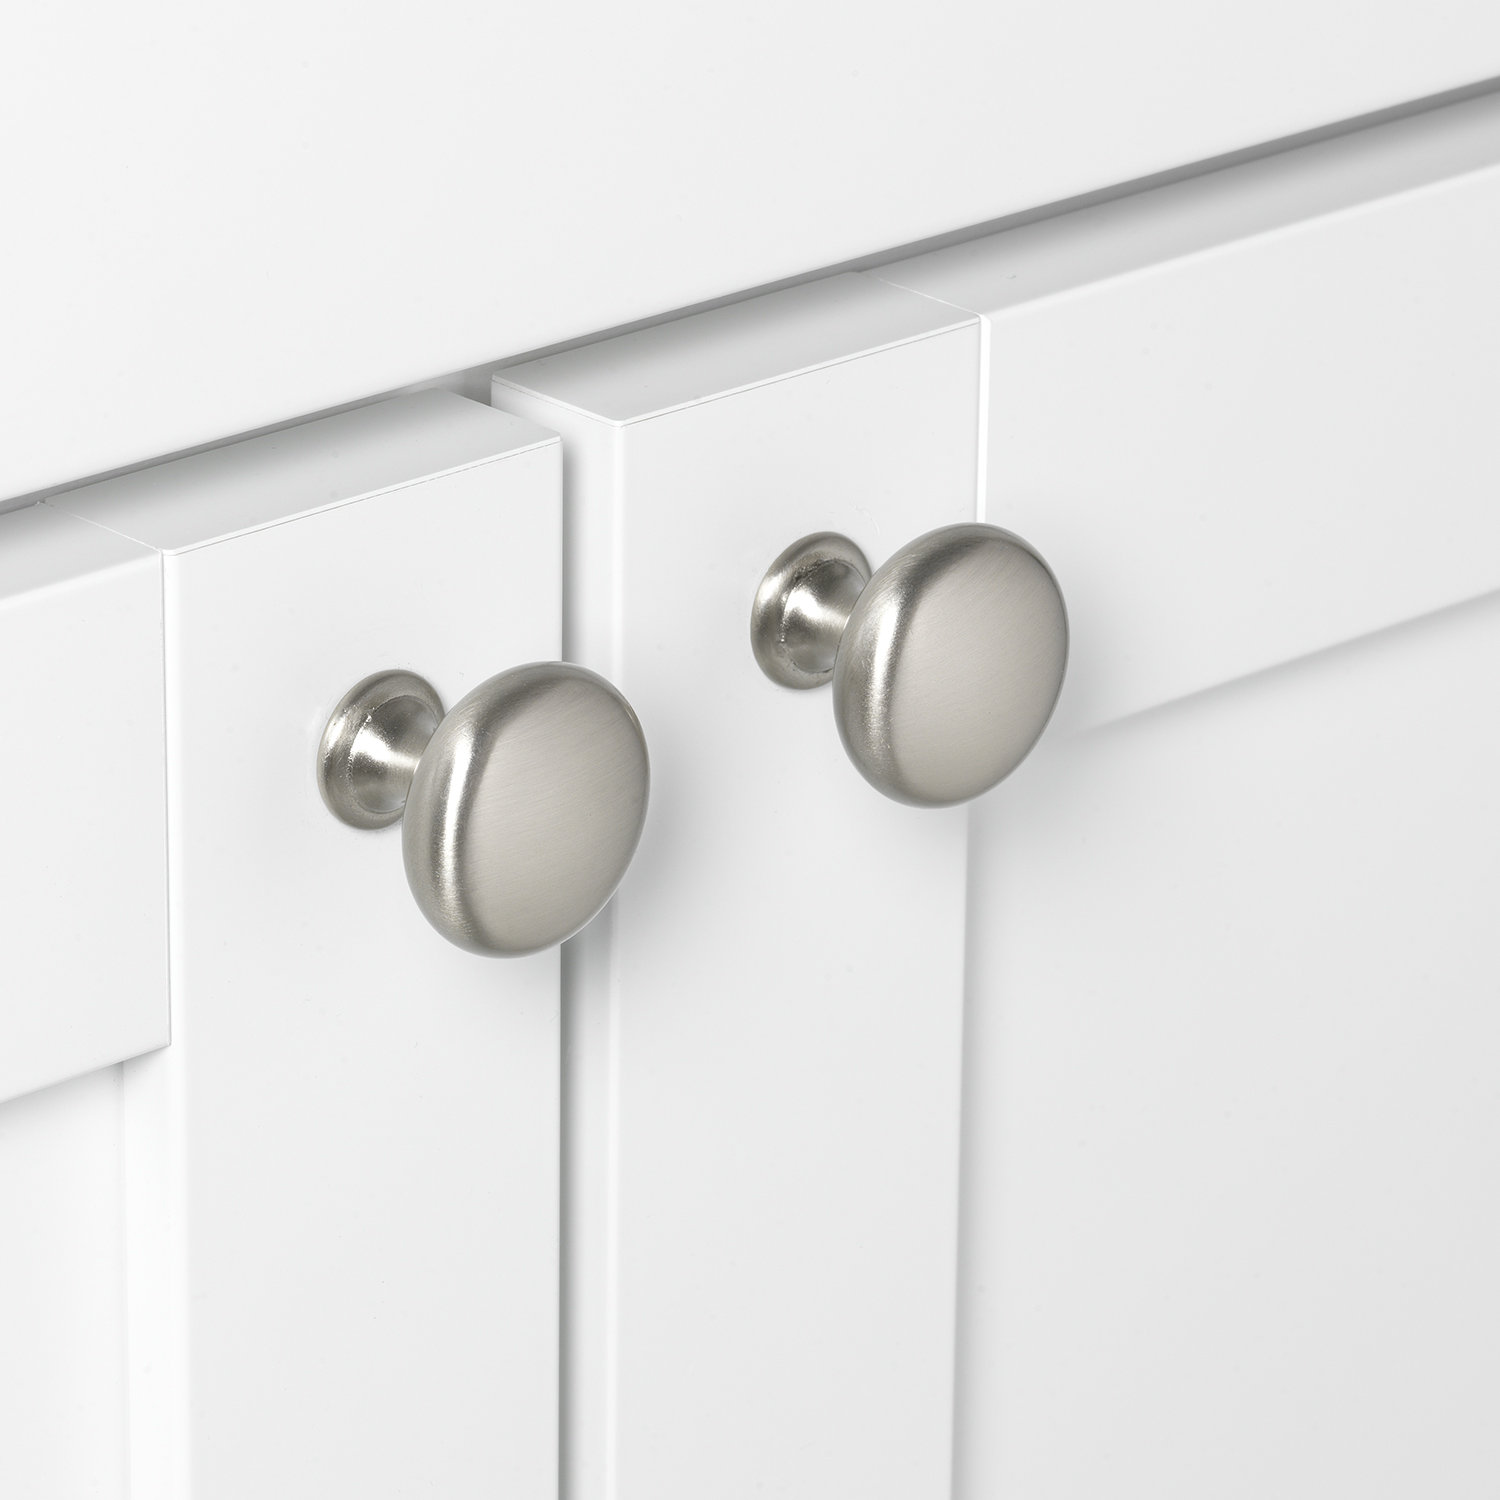 PACK OF 4 Chrome Ball Kitchen Cabinet Drawer Pull Wardrobe Door Knob Lots